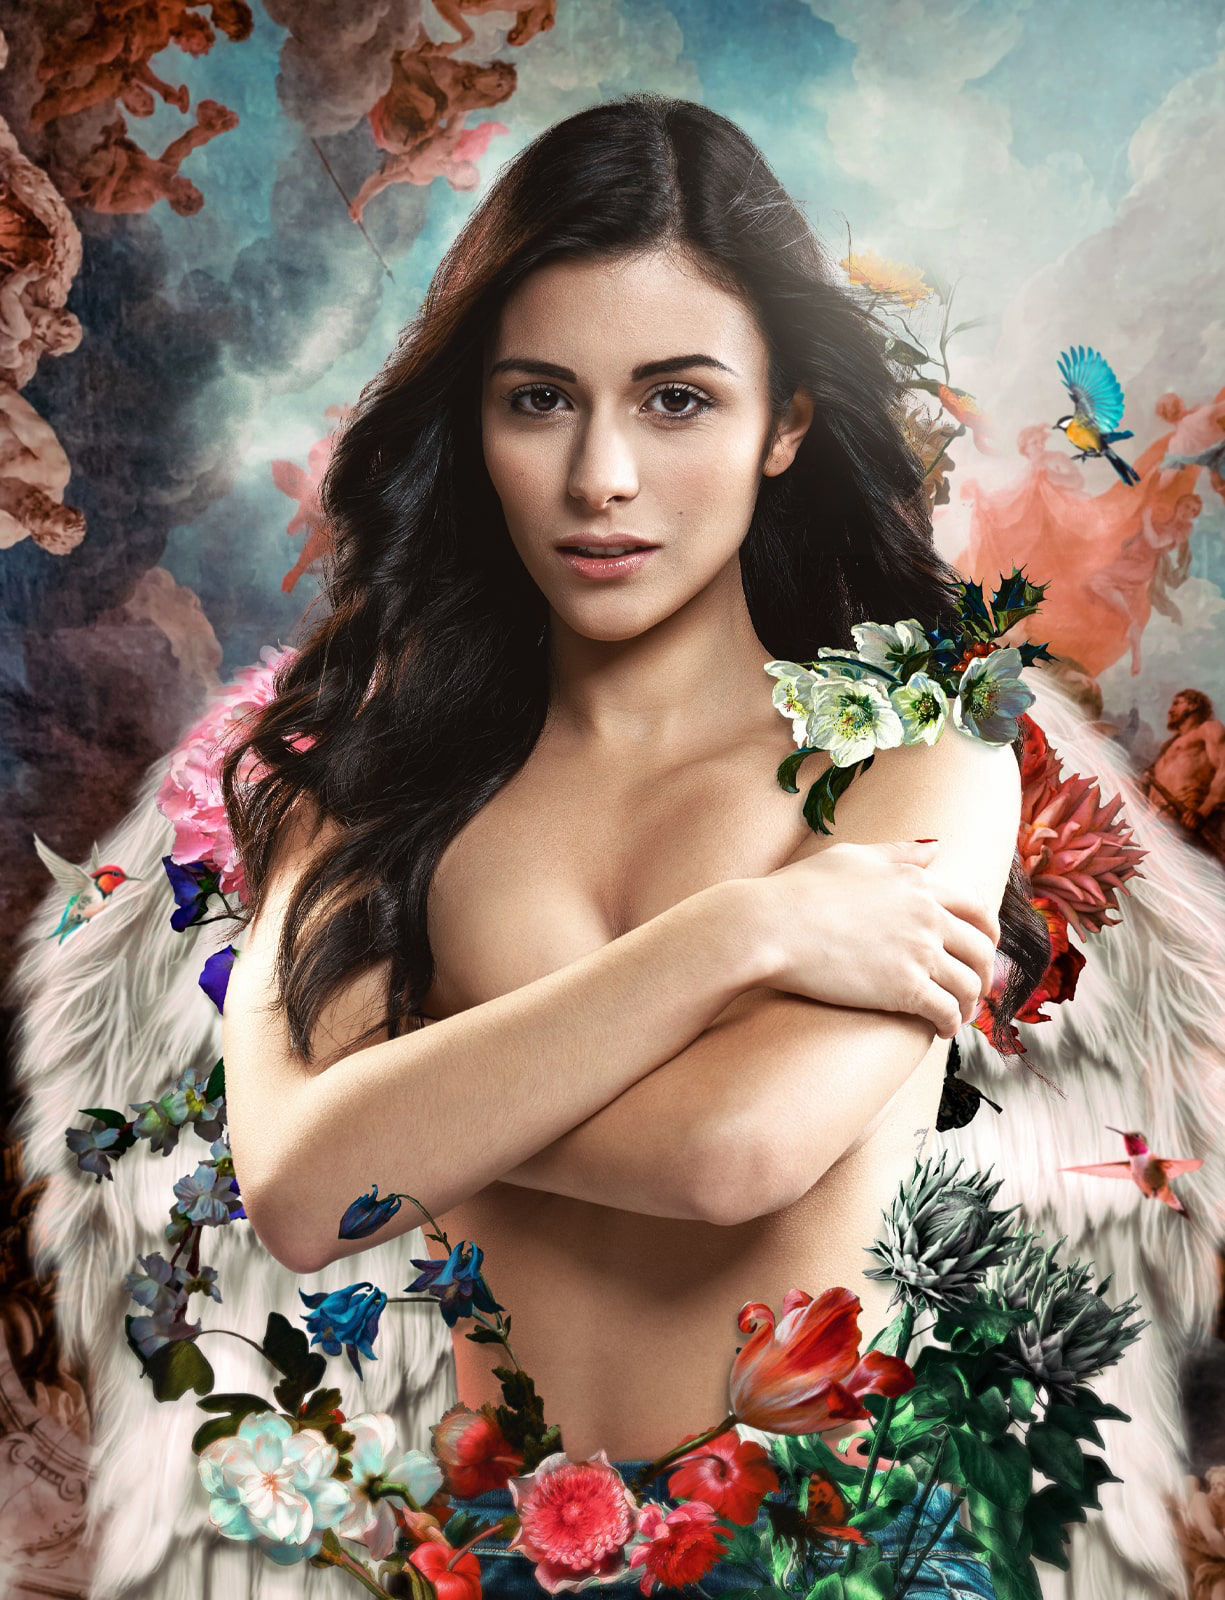 Surreal photography of a model with winds surrounded by flowers 